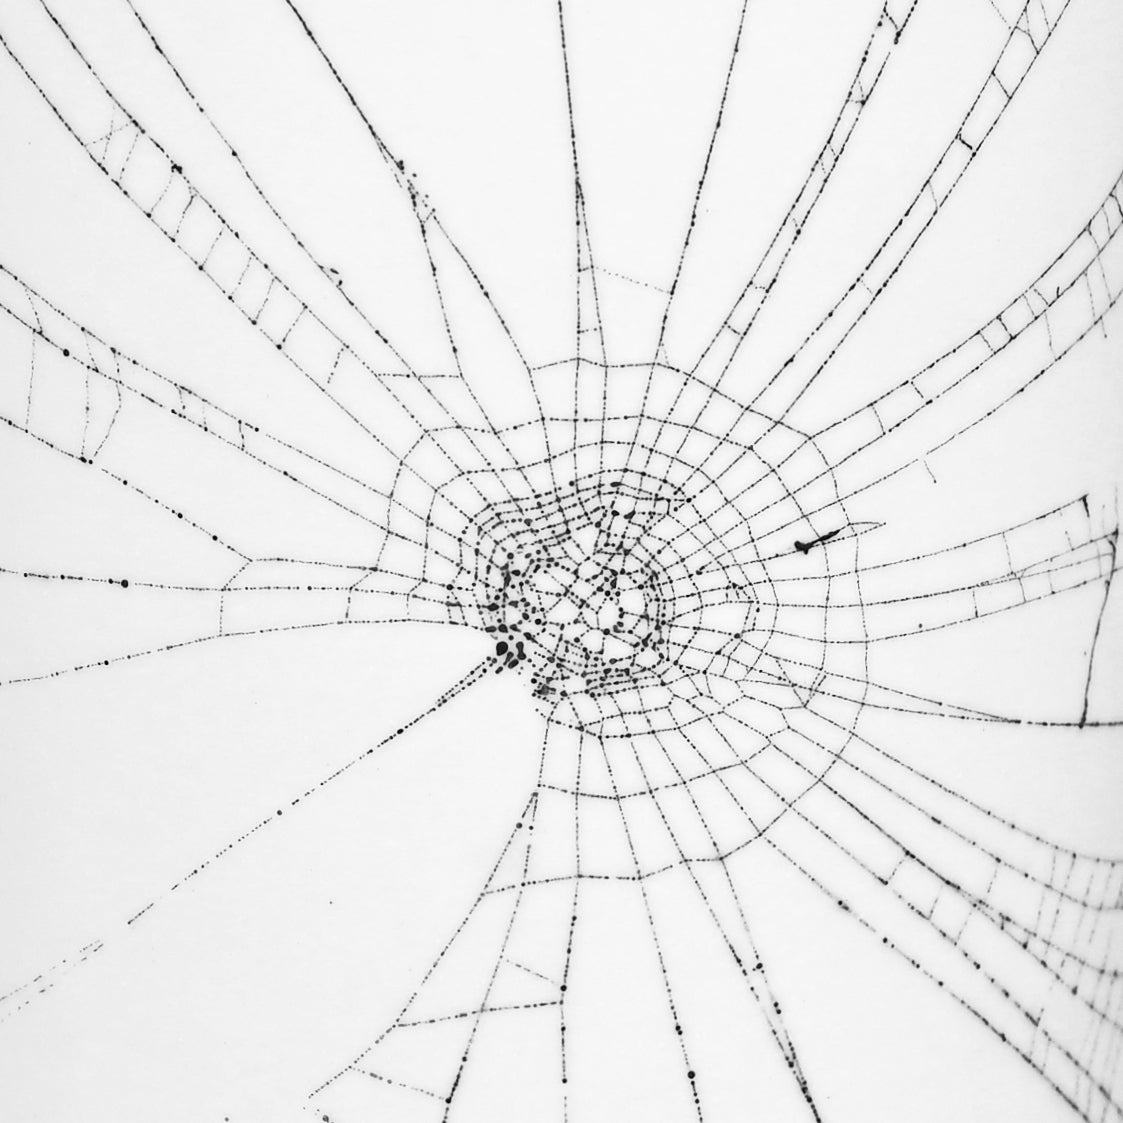 Web on Clay (169), Collected September 15, 2022